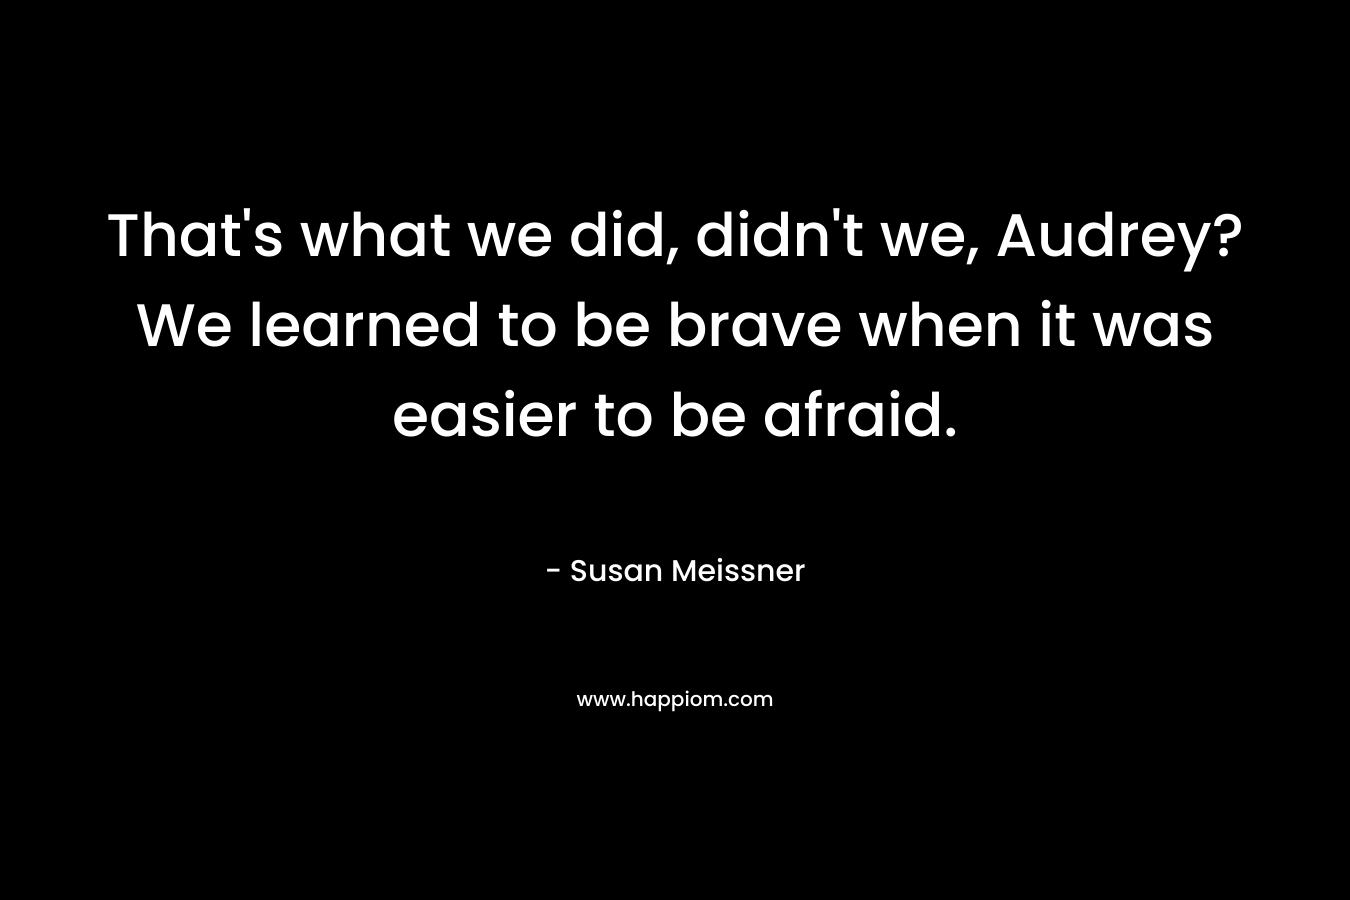 That's what we did, didn't we, Audrey? We learned to be brave when it was easier to be afraid.